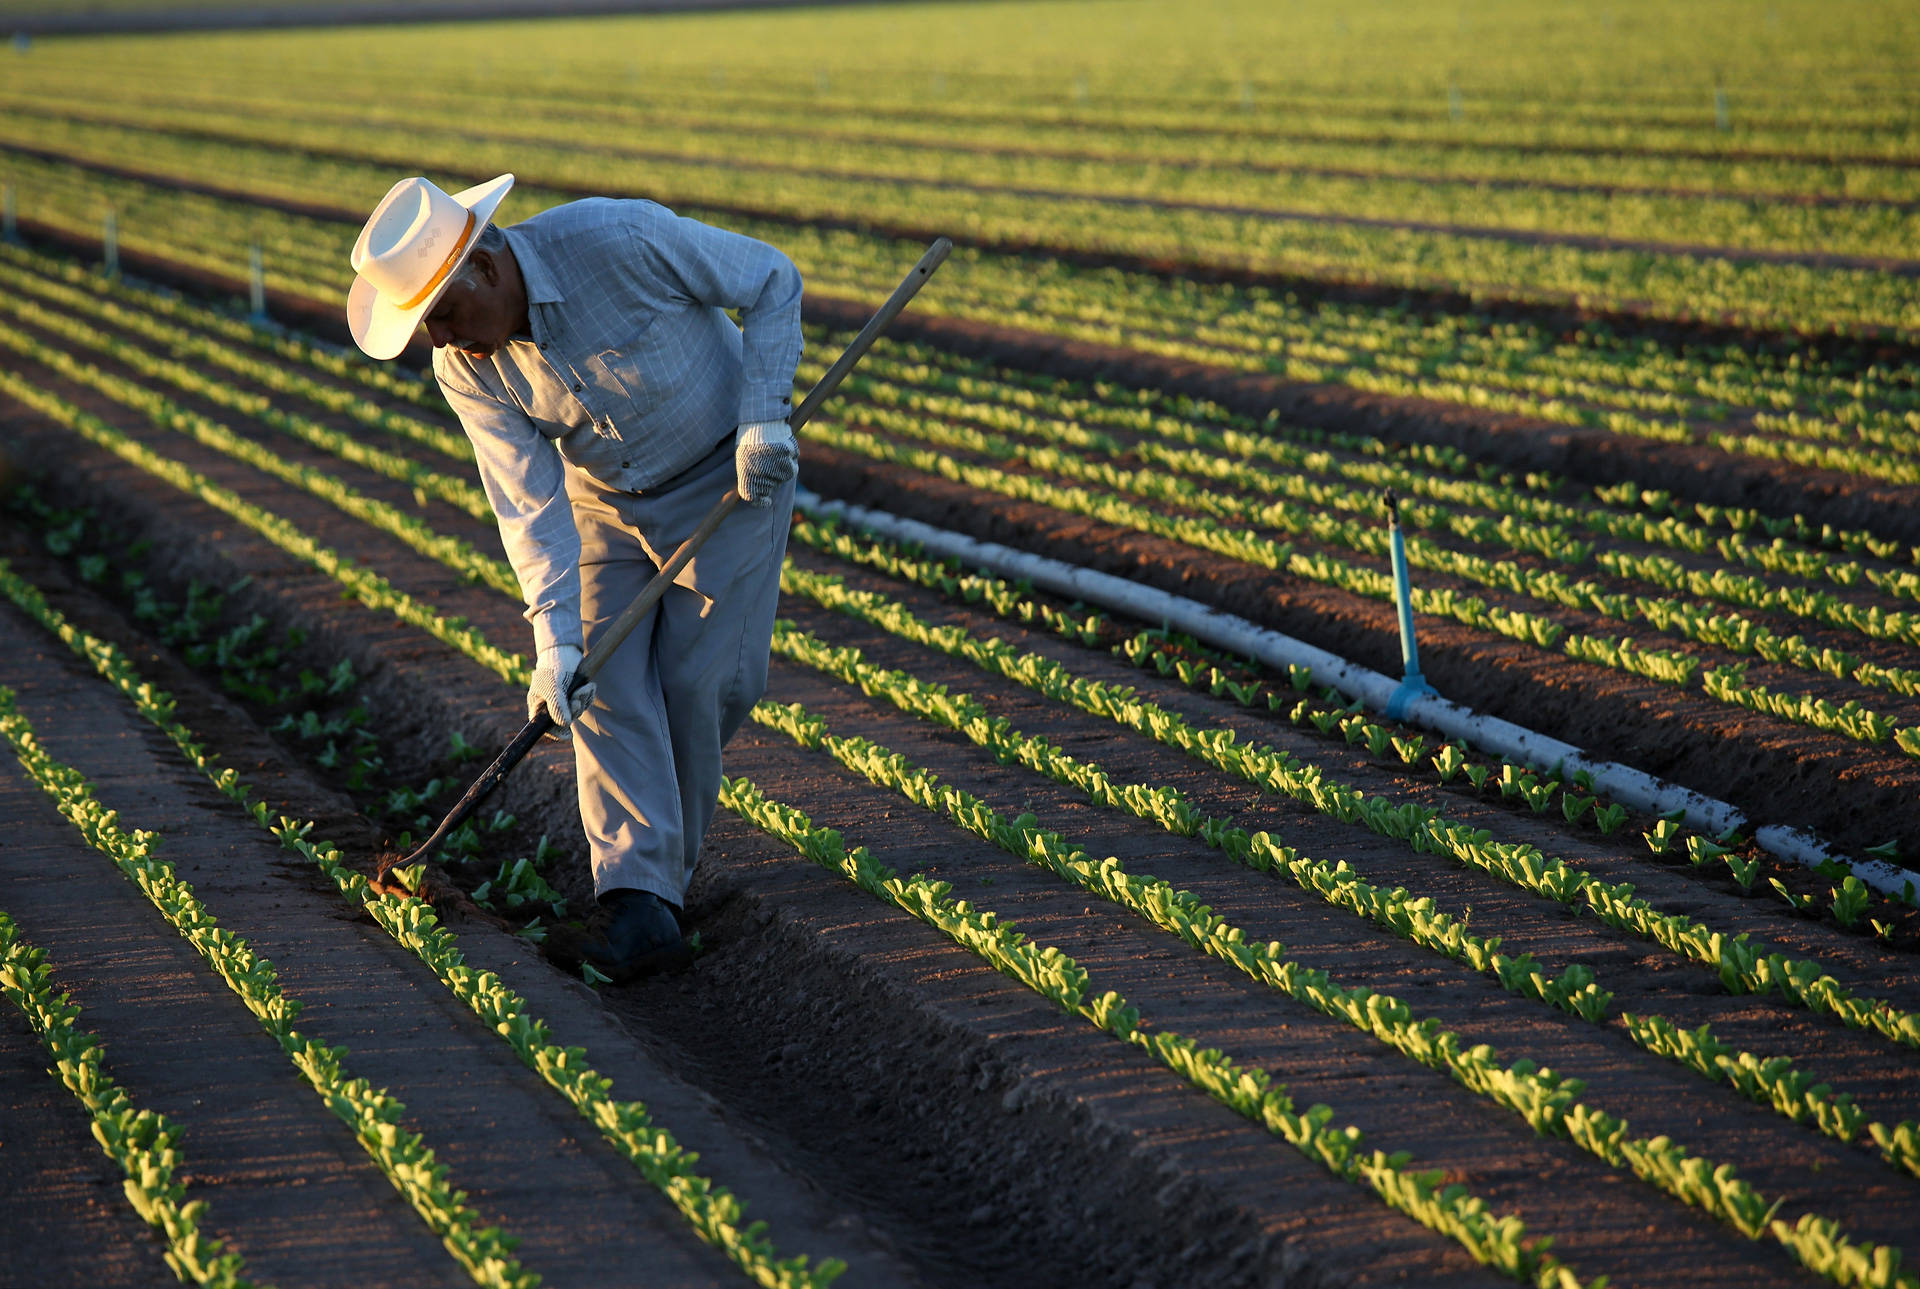 A Mexican farmworker cultivates lettuce in Holtville. 'It’s estimated by the U.S. Department of Agriculture that at least 50 percent of those who do the harvesting are undocumented,' says UCLA Anderson senior economist Jerry Nickelsburg. 'If they’re not there, who’s going to pick the crops?' John Moore/Getty Images